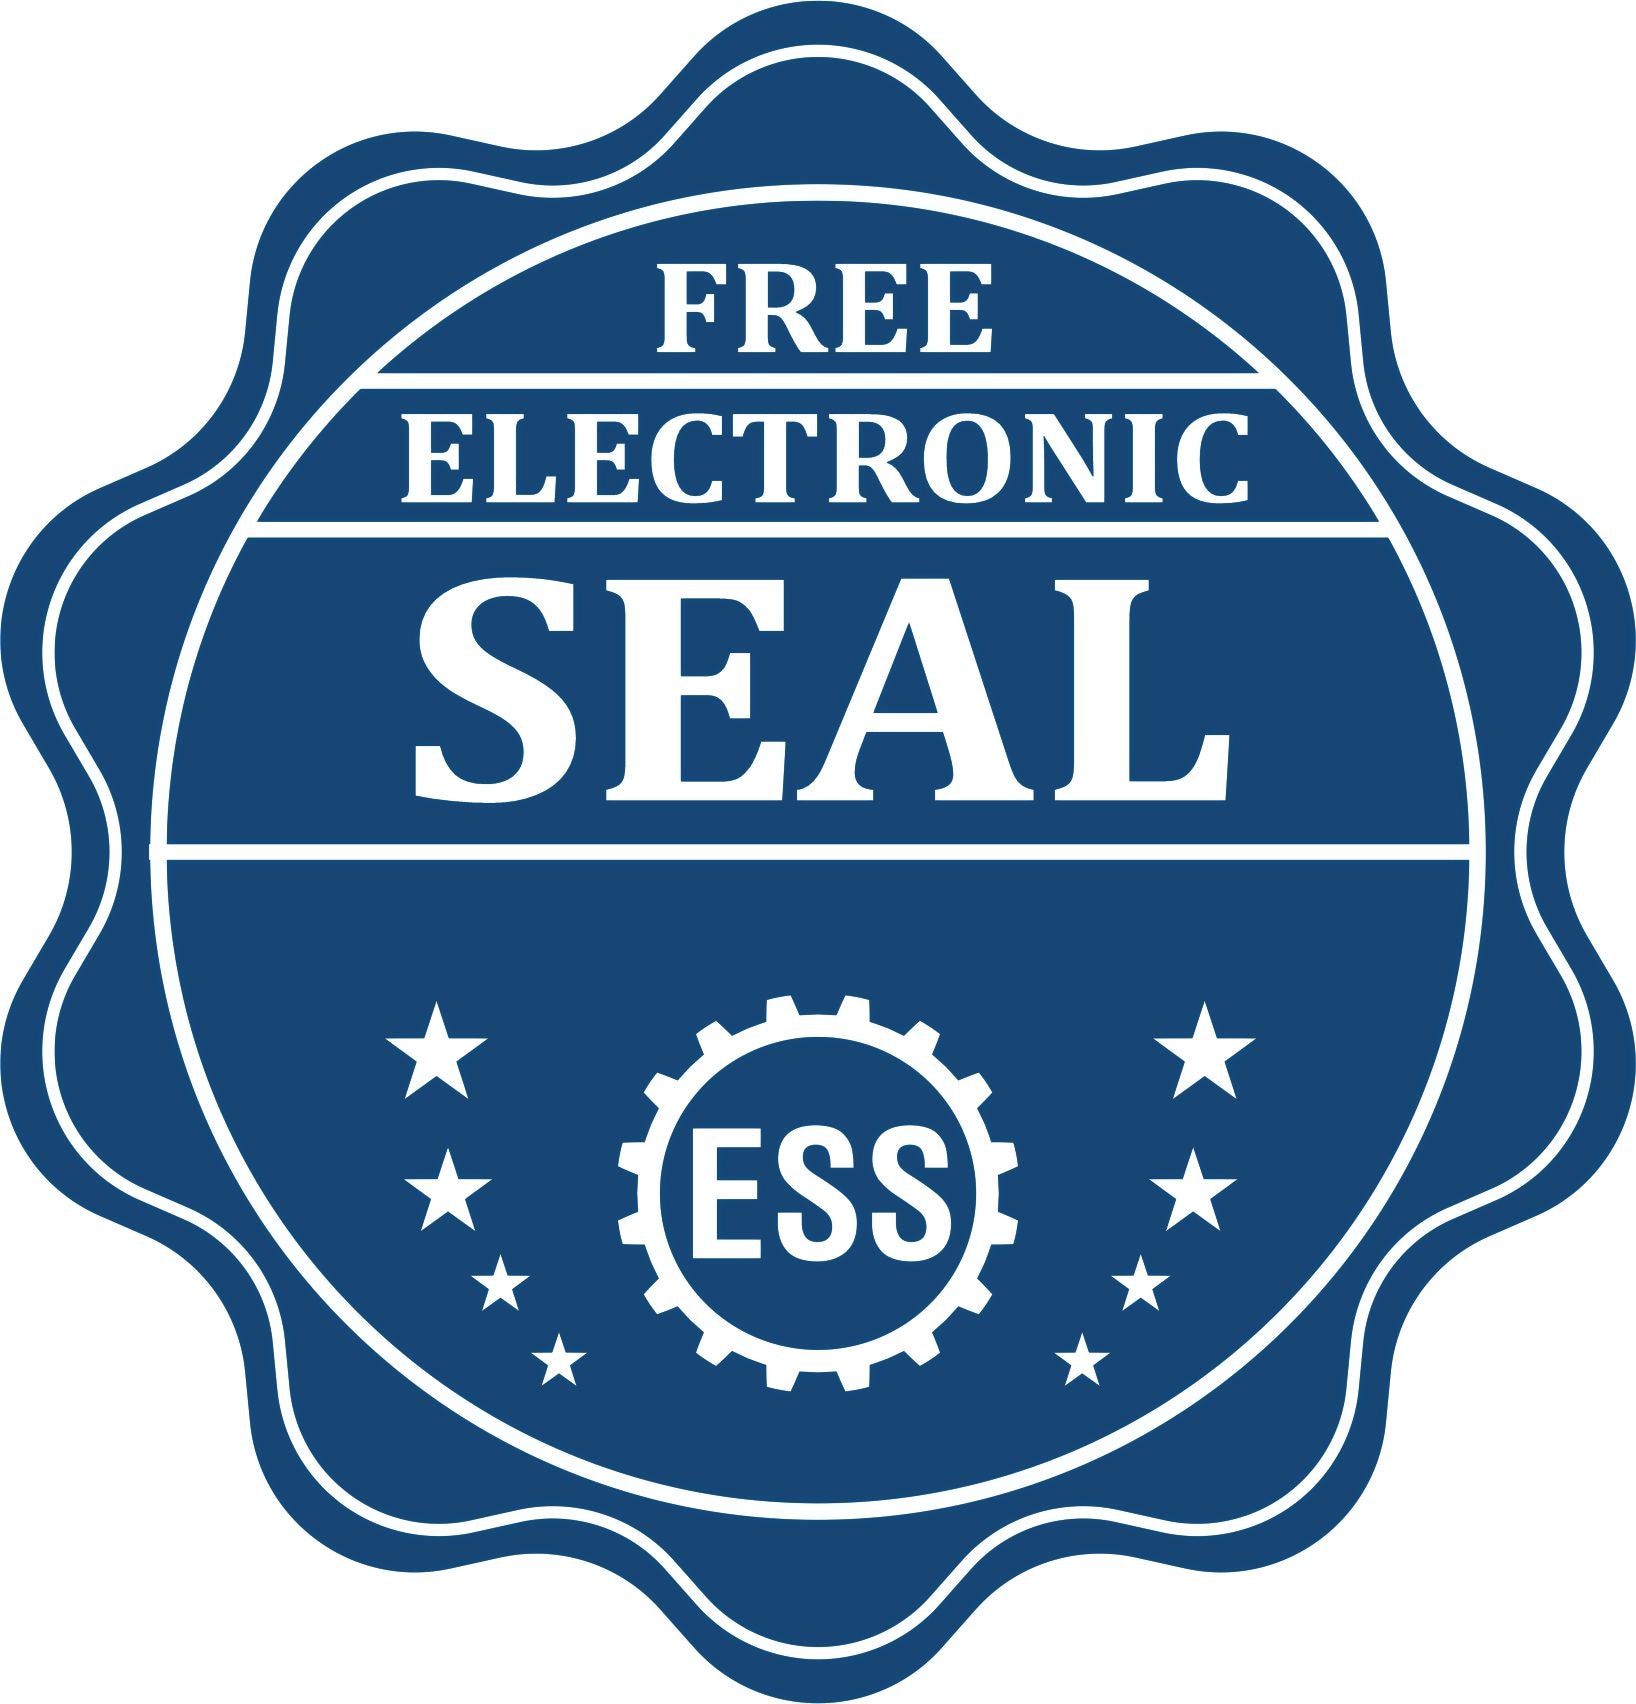 A badge showing a free electronic seal for the New Hampshire Geologist Desk Seal with stars and the ESS gear on the emblem.